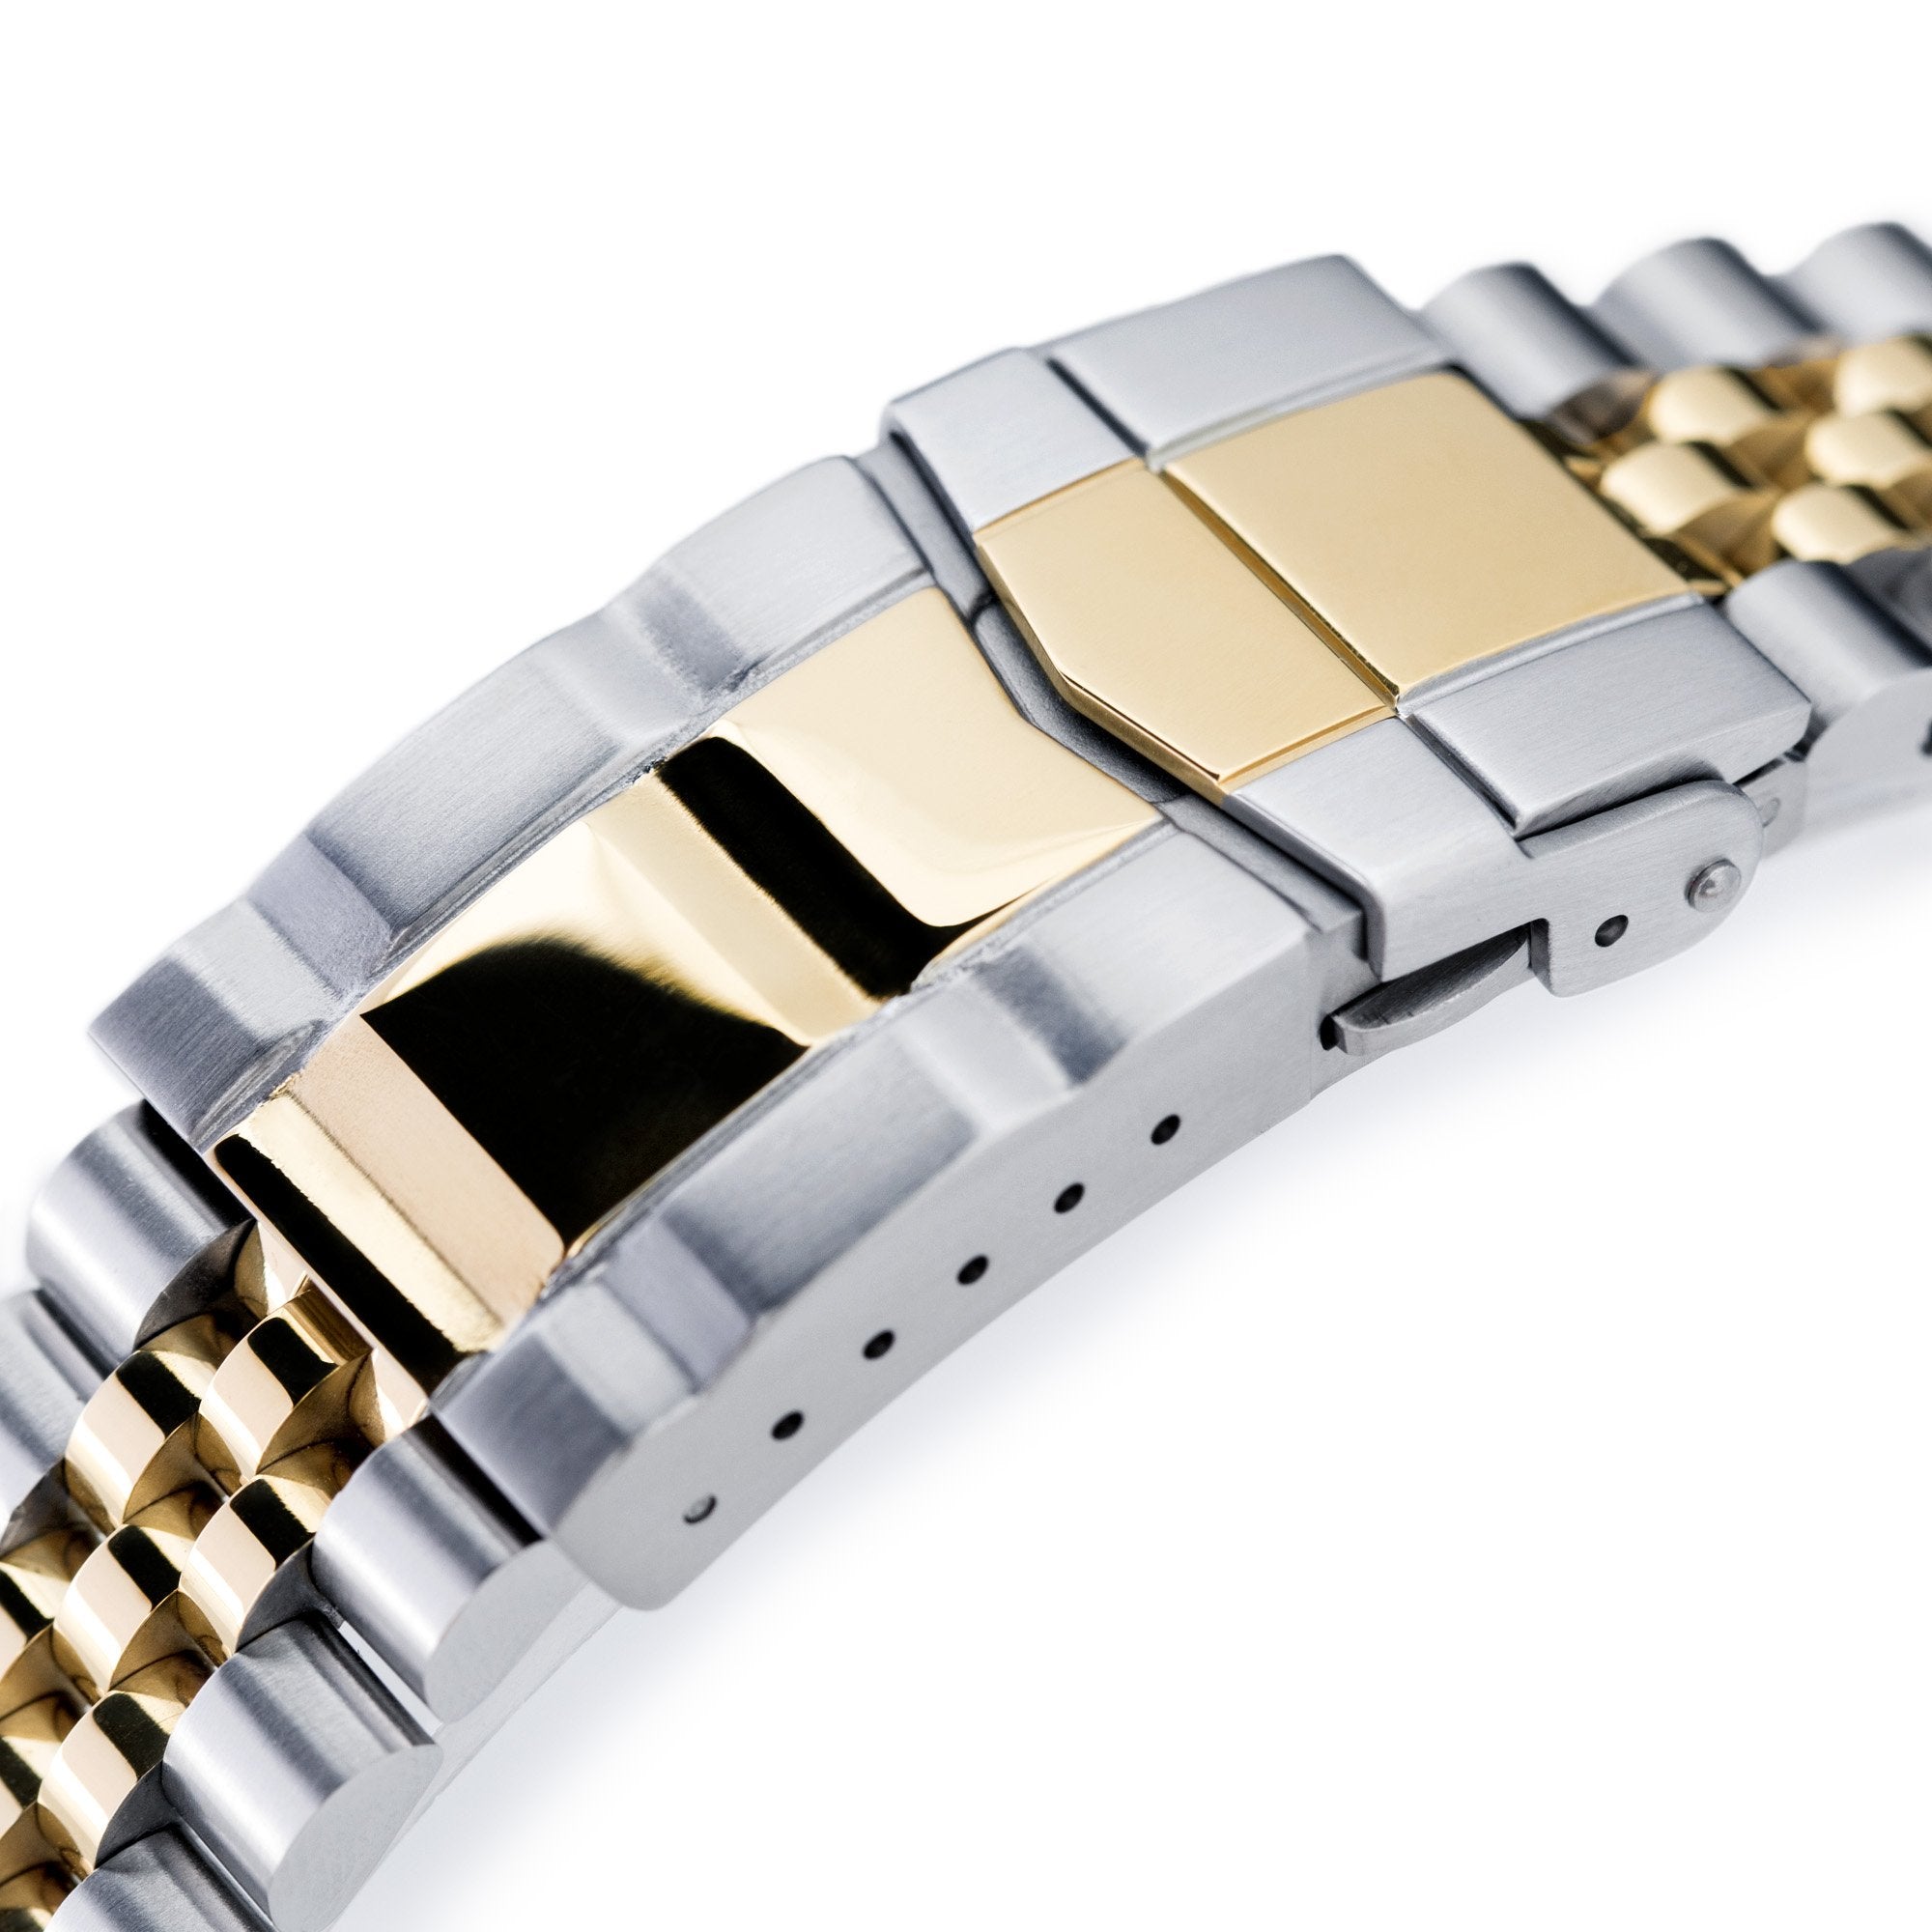 22mm Super-J Louis JUB 316L Stainless Steel Watch Bracelet for Seiko New Turtles SRP777, Two Tone IP Gold SUB Clasp Strapcode Watch Bands